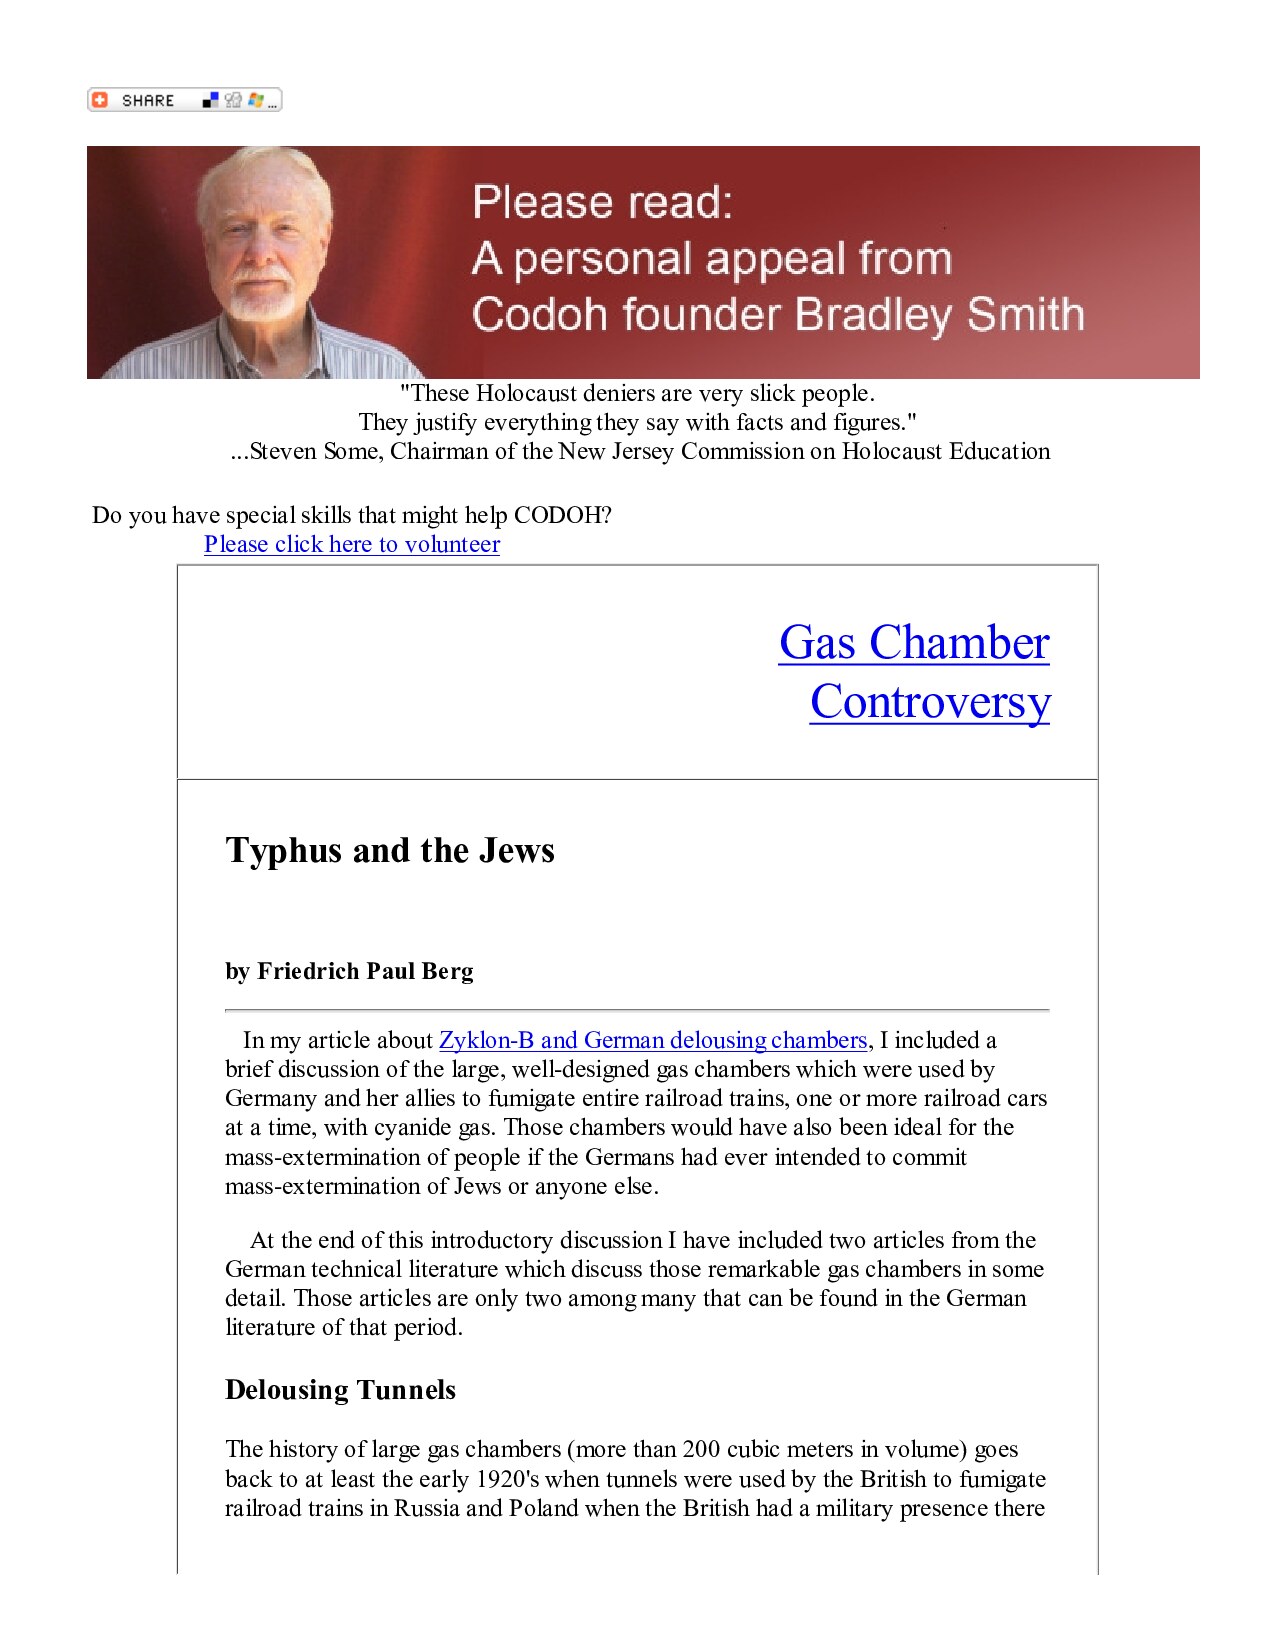 Gas Chambers: Typhus and the Jews